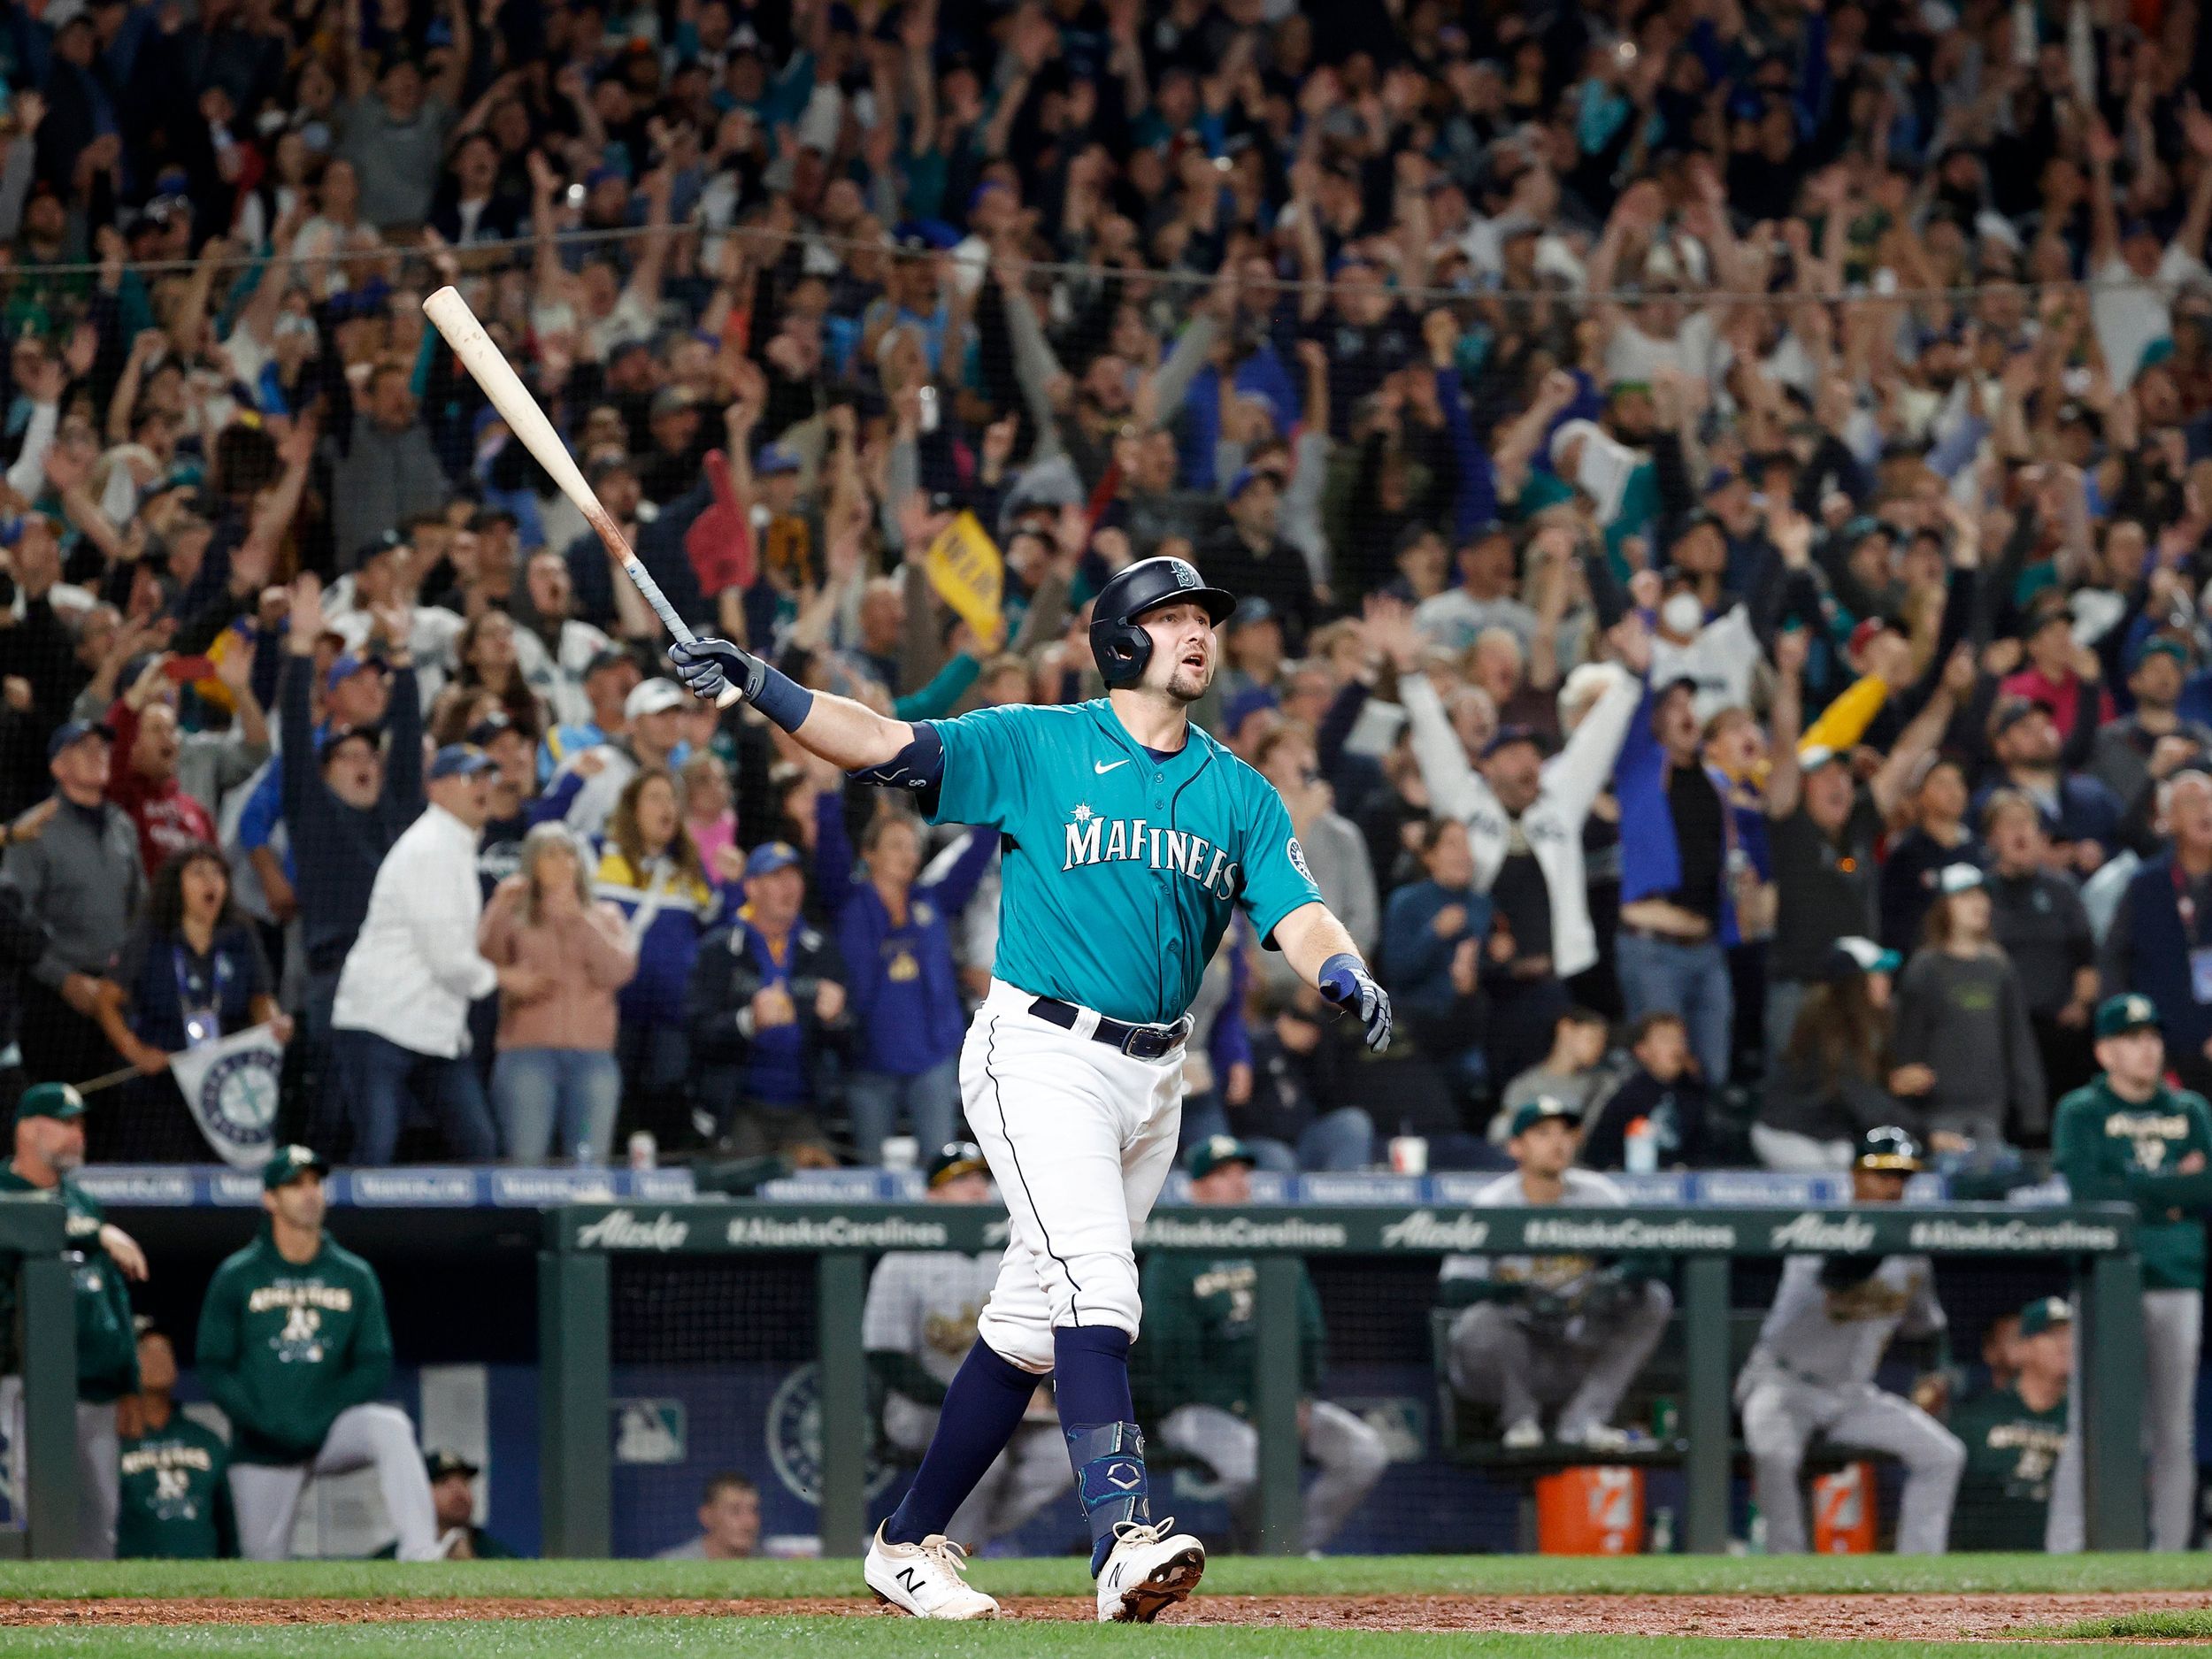 A Grip on Sports: Cal Raleigh's home run not only lifted Seattle